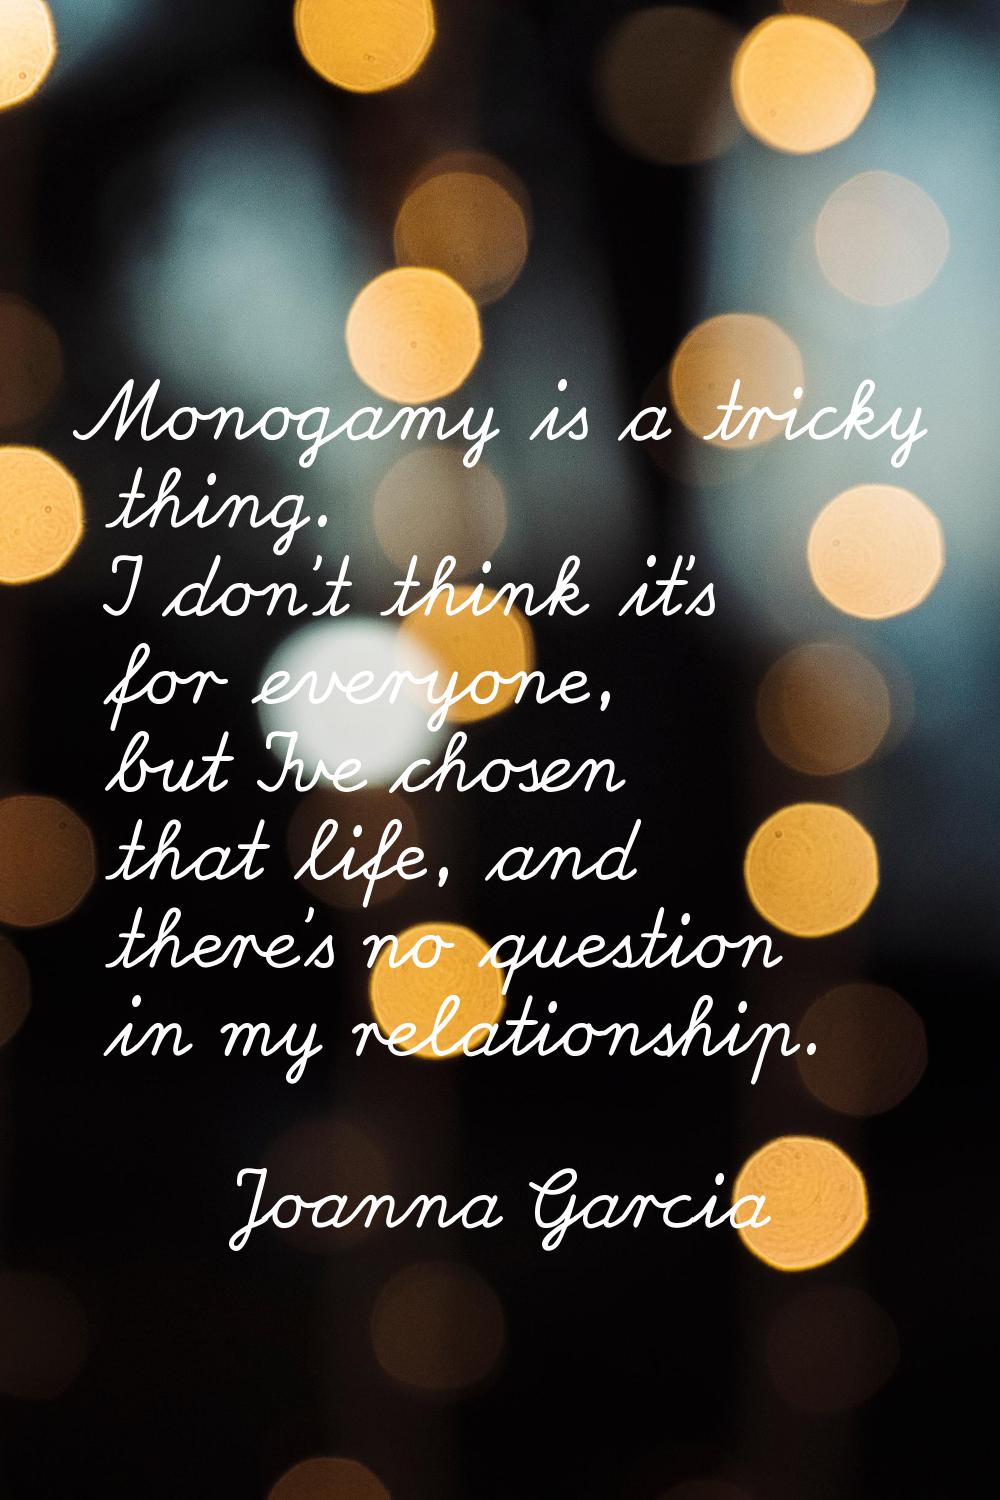 Monogamy is a tricky thing. I don't think it's for everyone, but I've chosen that life, and there's